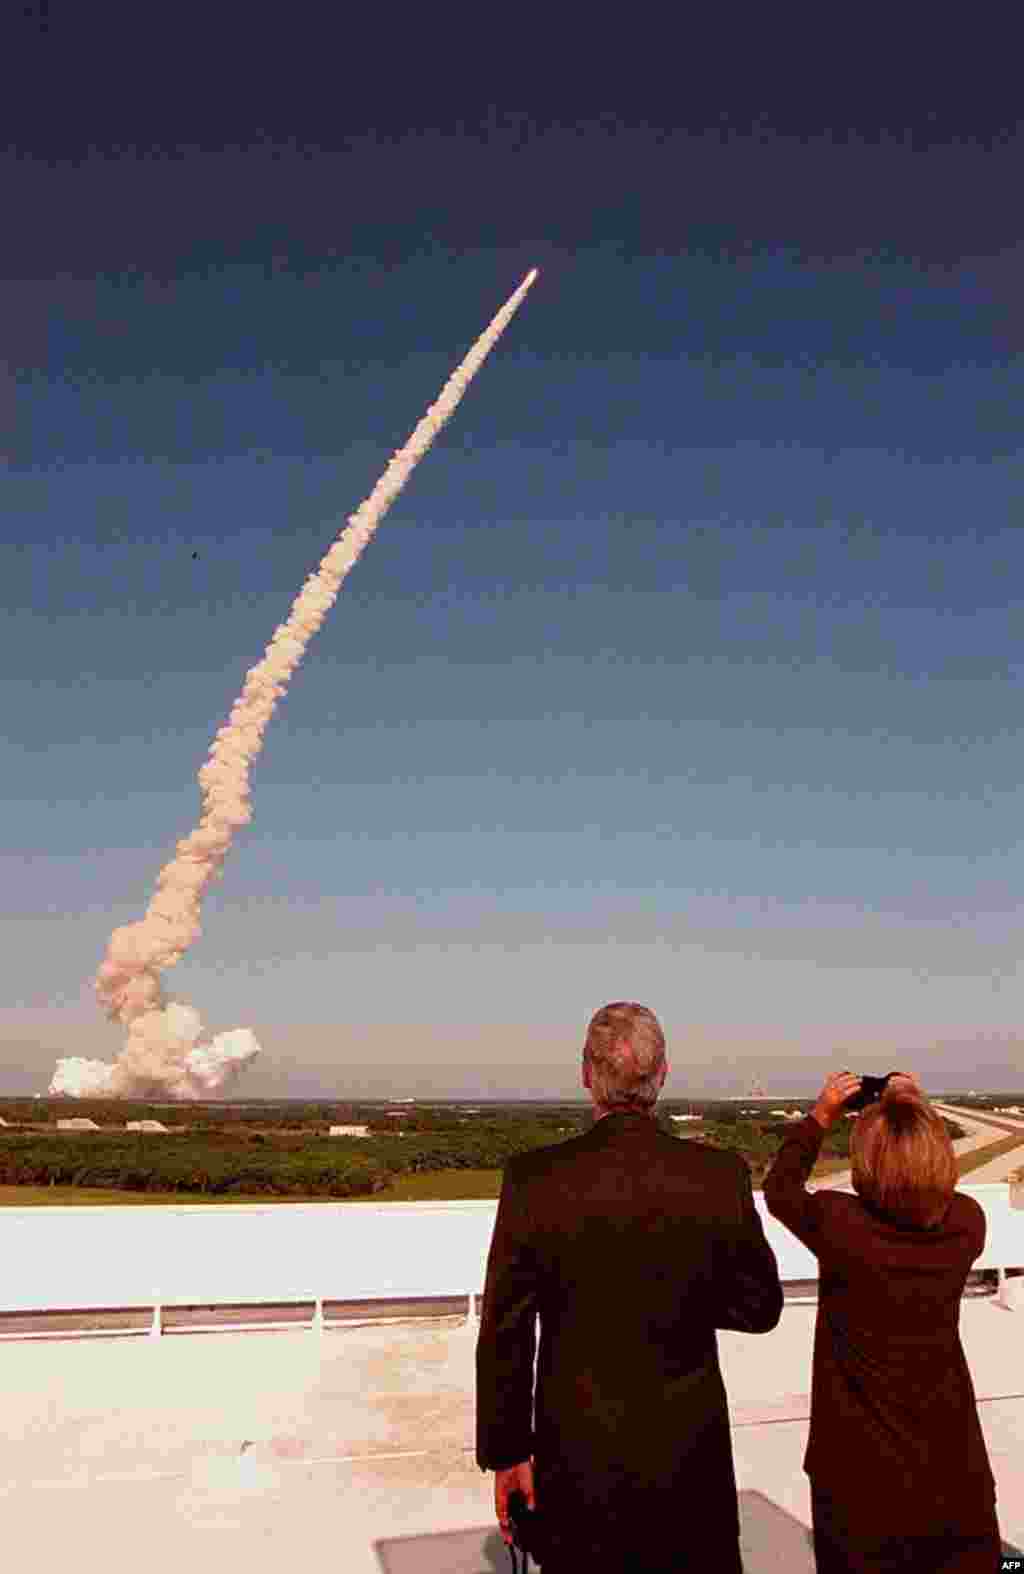 From the roof of the Launch Control Center, then U.S. President Bill Clinton and Hillary Clinton track the plume and successful launch of space shuttle Discovery on mission STS-95, October 29, 1998. (NASA) 